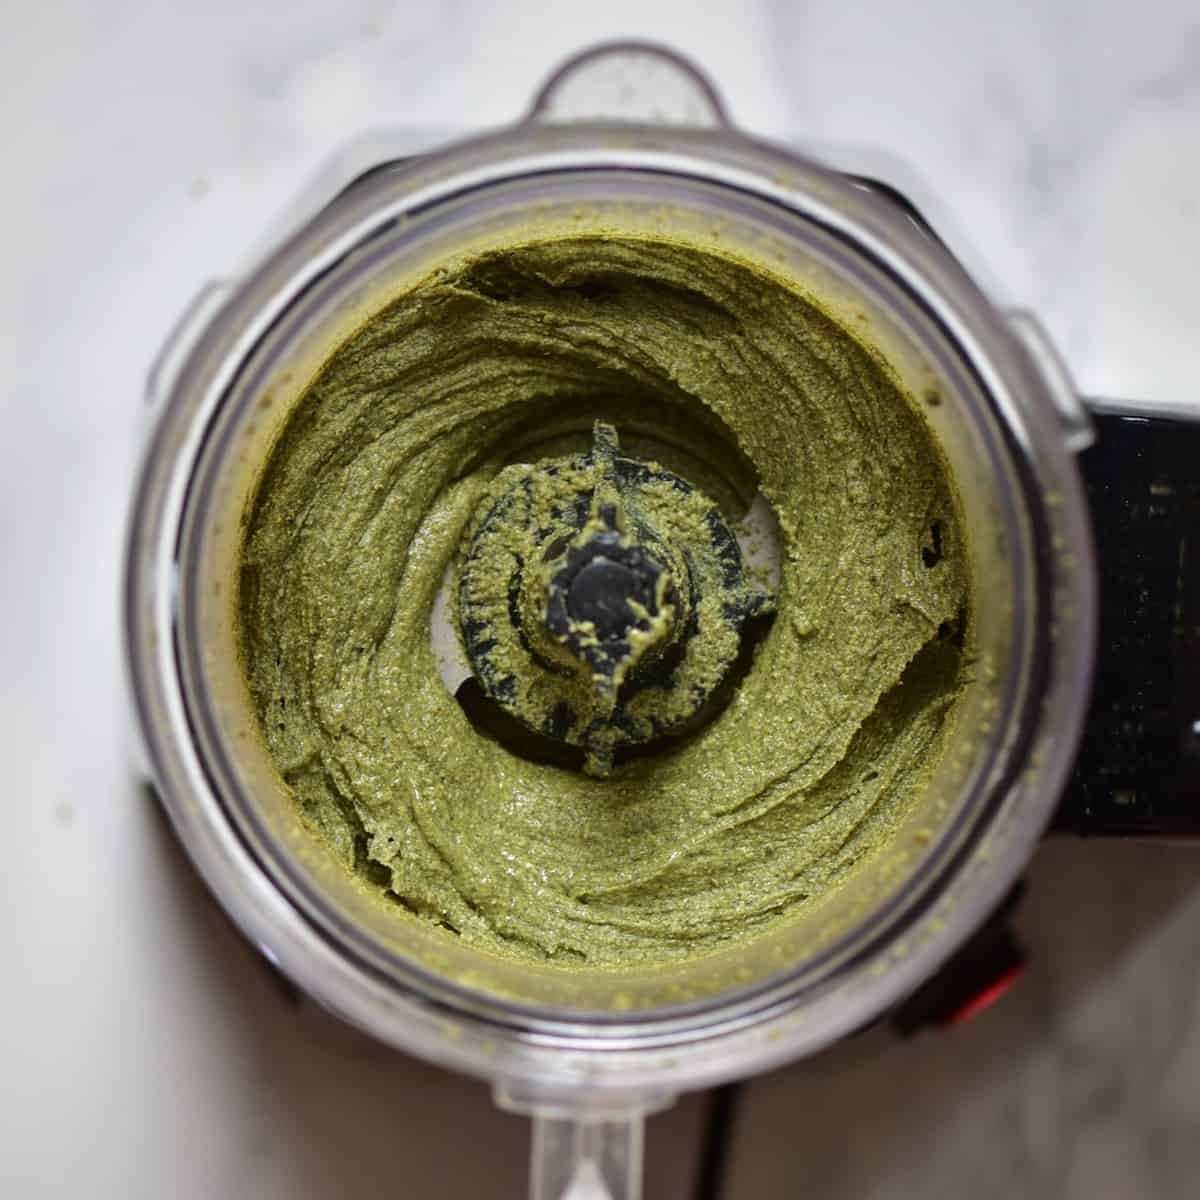 A delicious, Vegan one ingredient homemade Pumpkin seed butter recipe with flavoured pumpkin seed butter options, health benefits of pumpkin seeds and pumpkin seed butter uses!